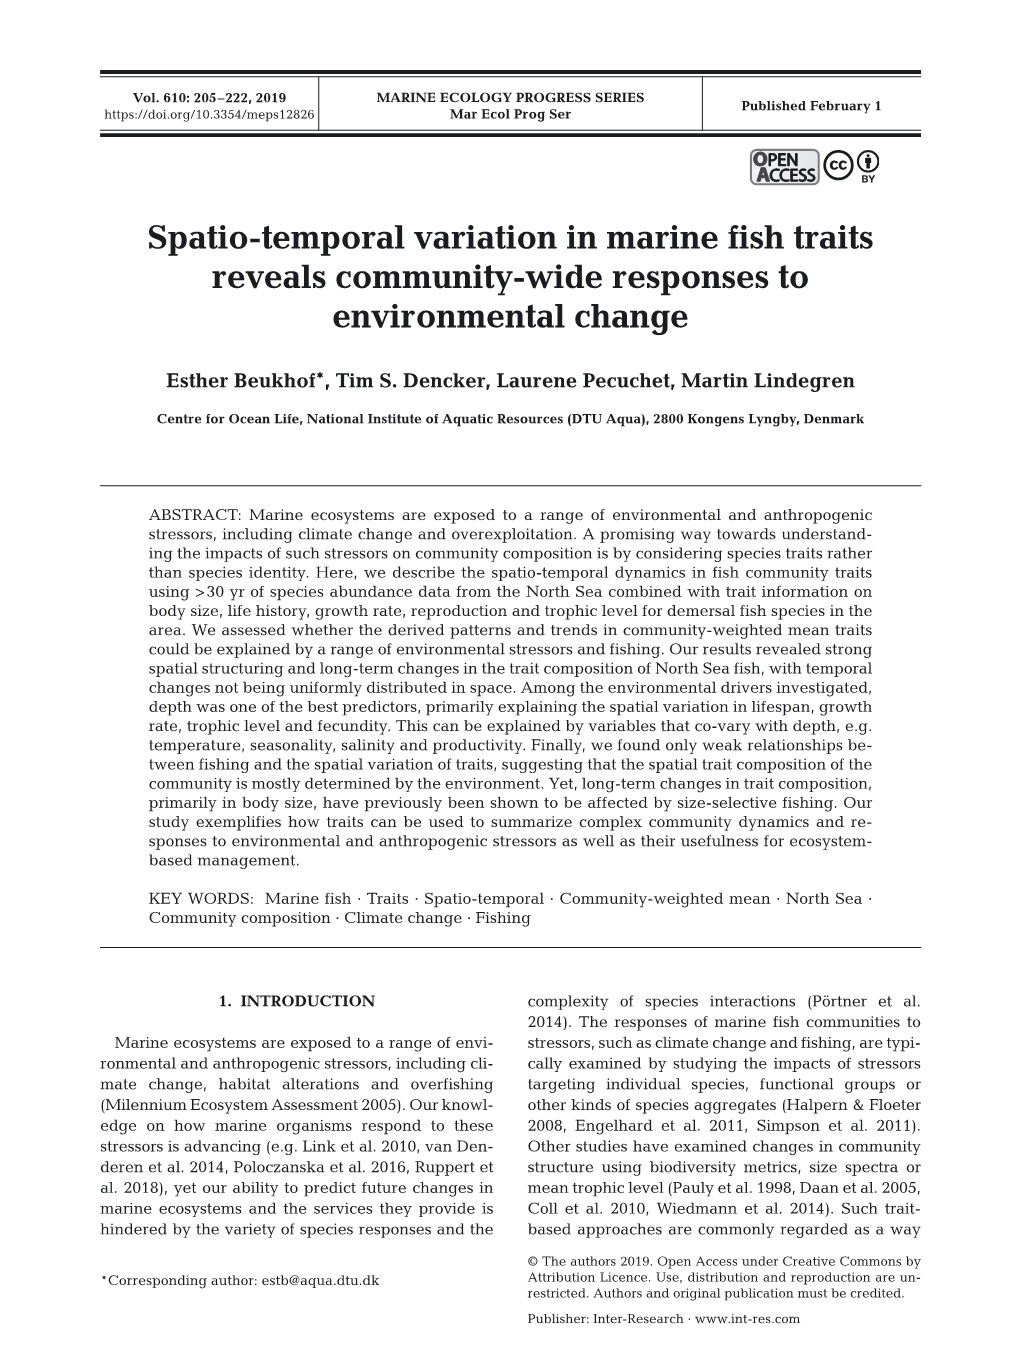 Spatio-Temporal Variation in Marine Fish Traits Reveals Community-Wide Responses to Environmental Change